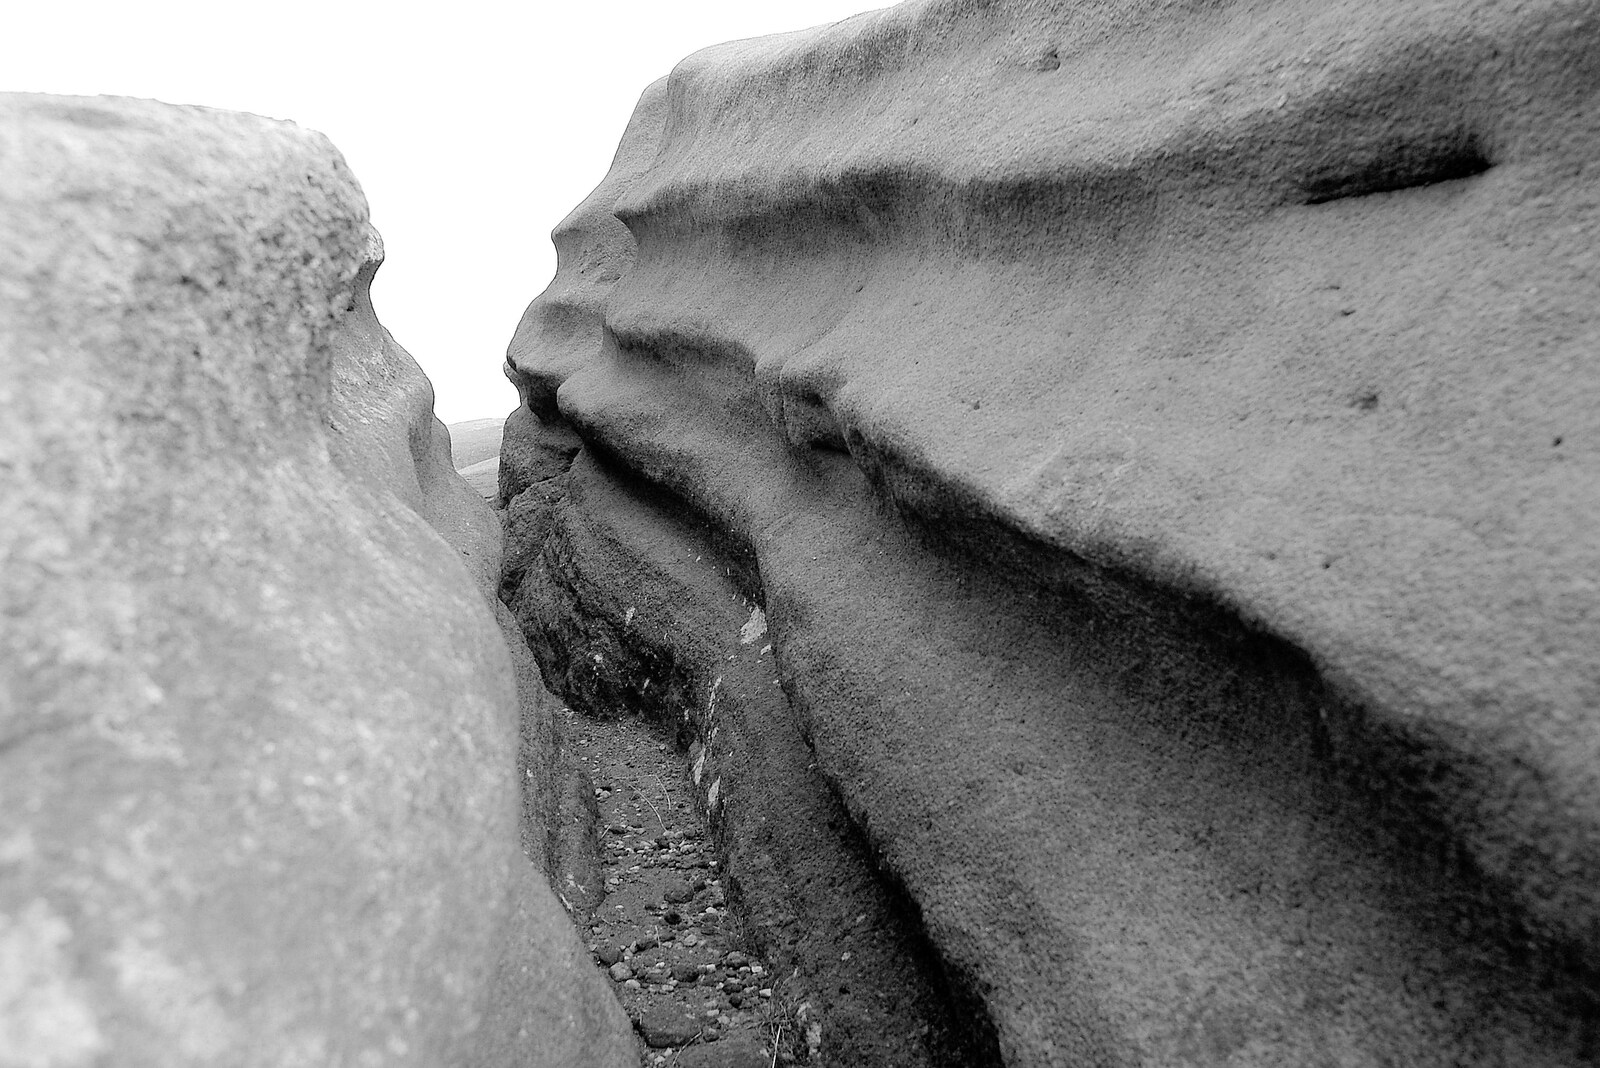 The Pennine Way: Lost on Kinder Scout, Derbyshire - 9th October 2005: More aeolian carving